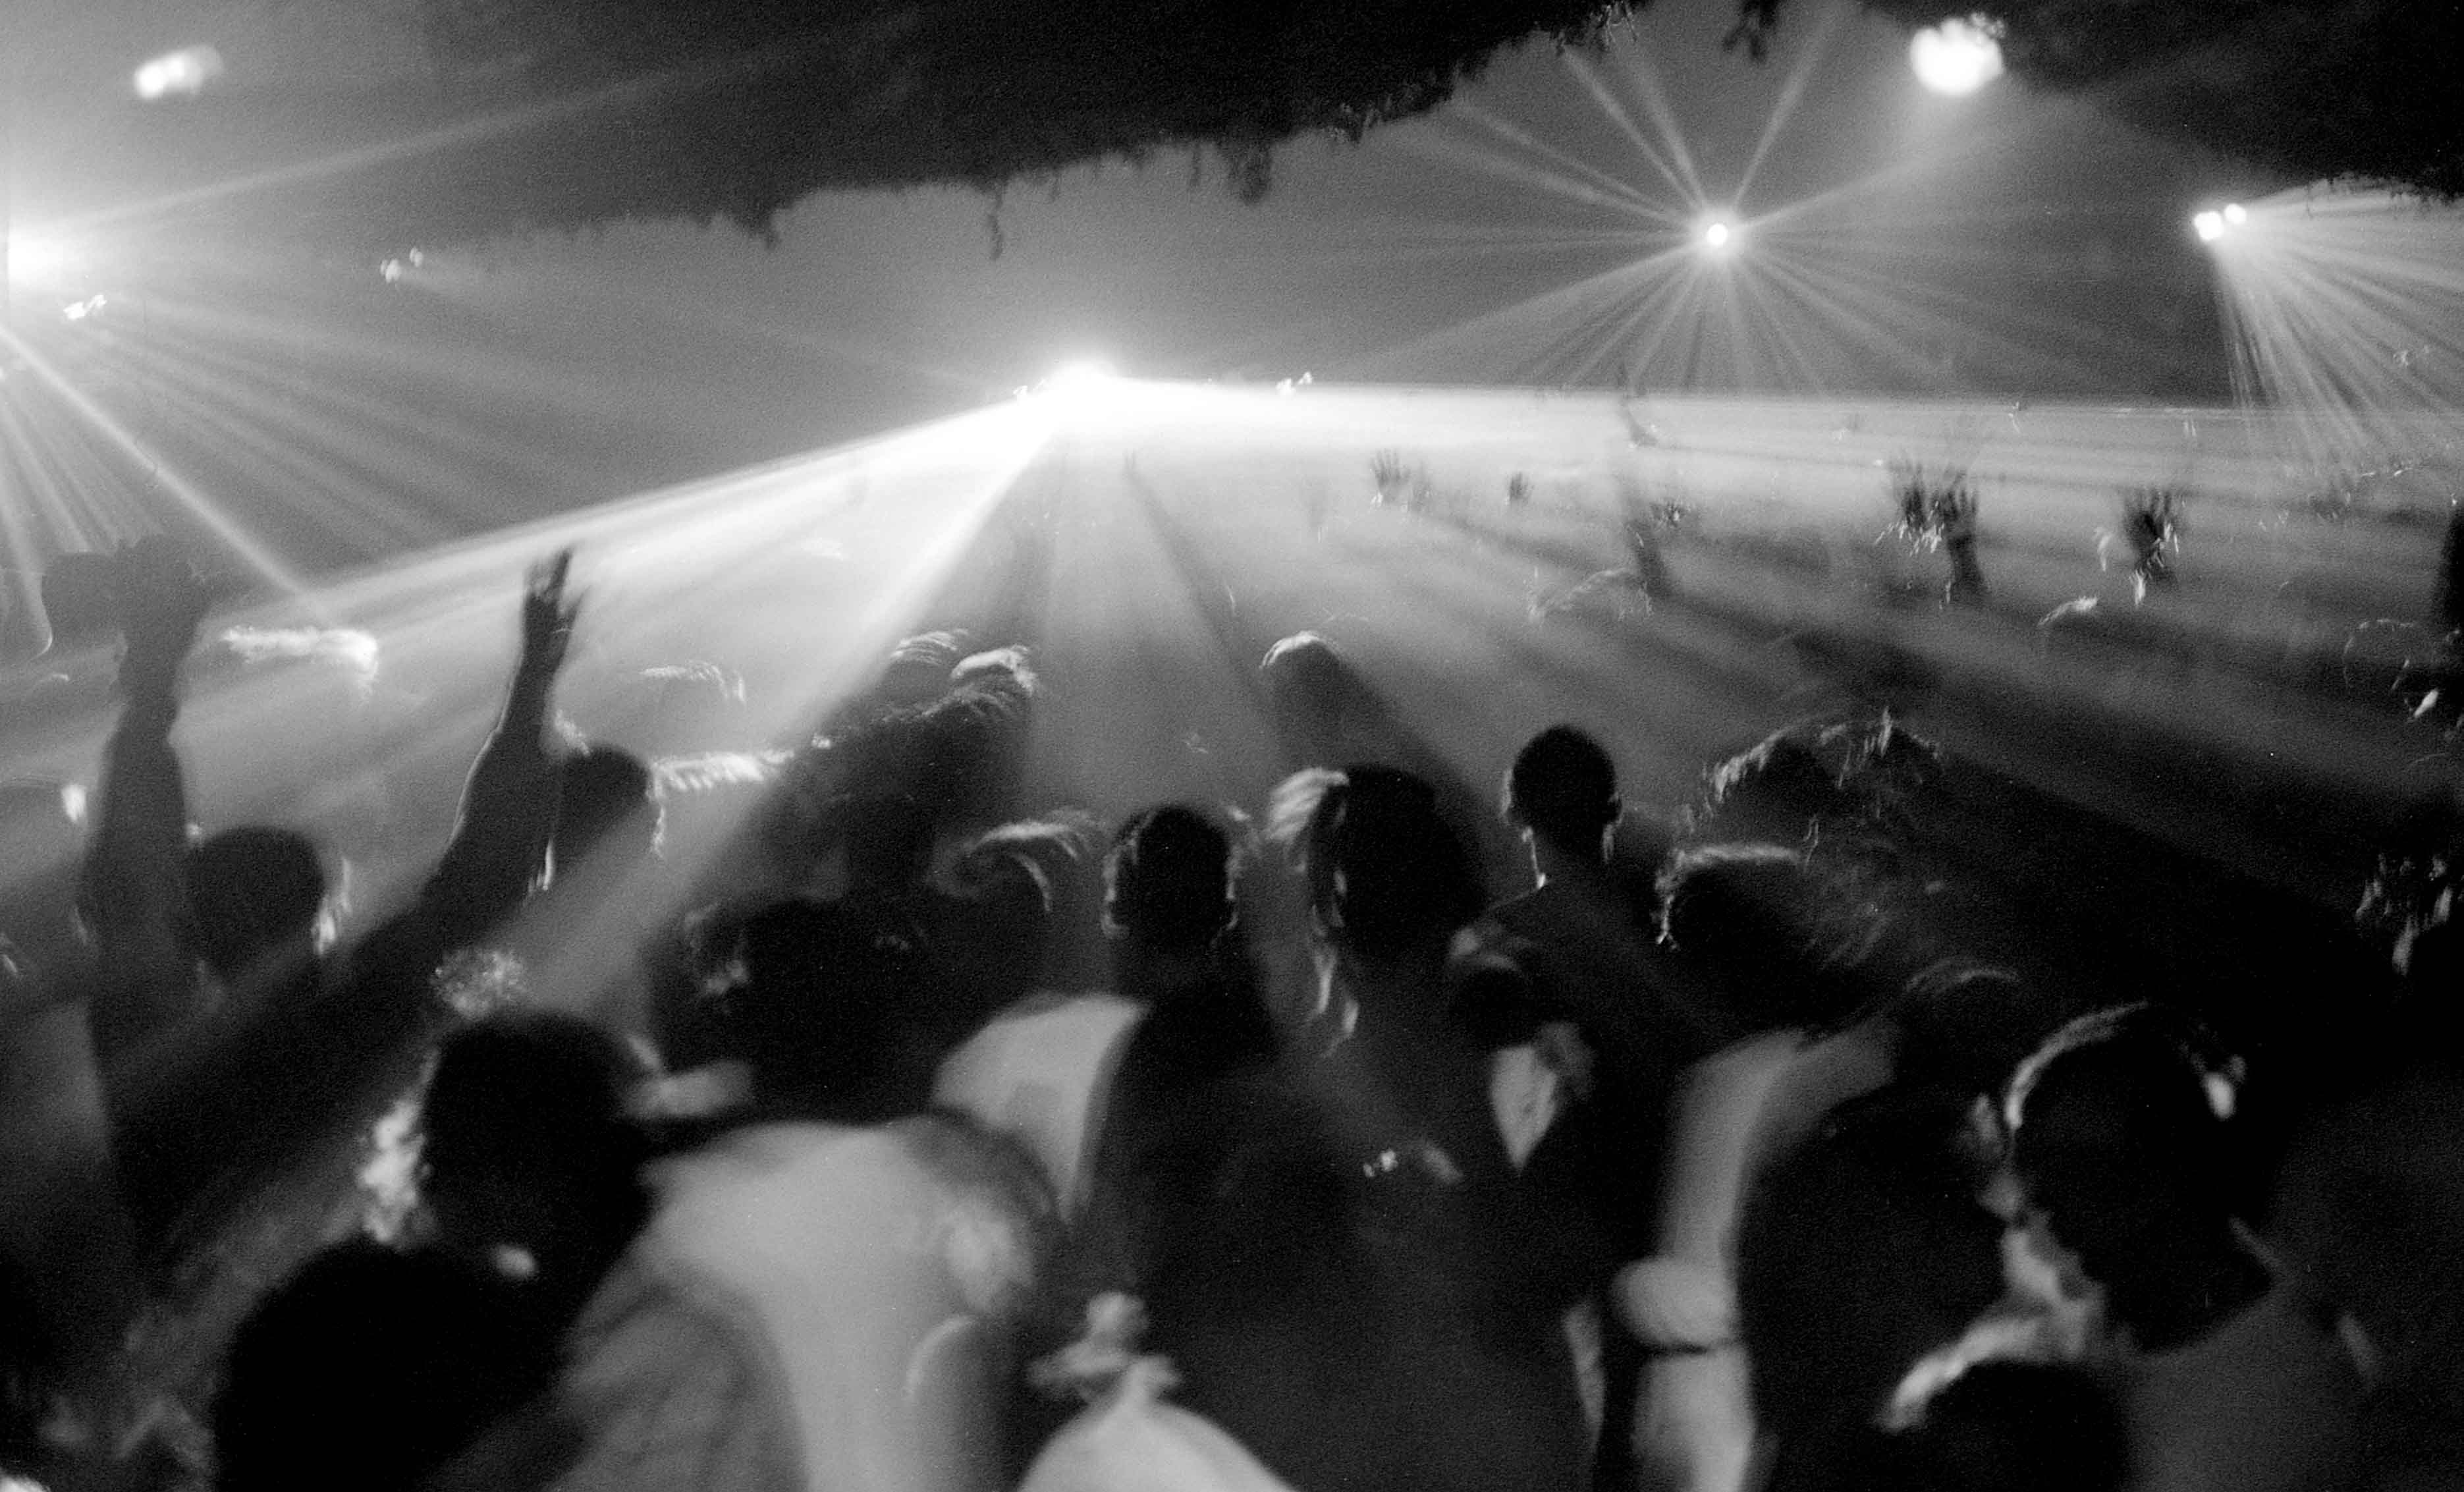 Illegal raves are booming in lockdown Britain. Can authorities